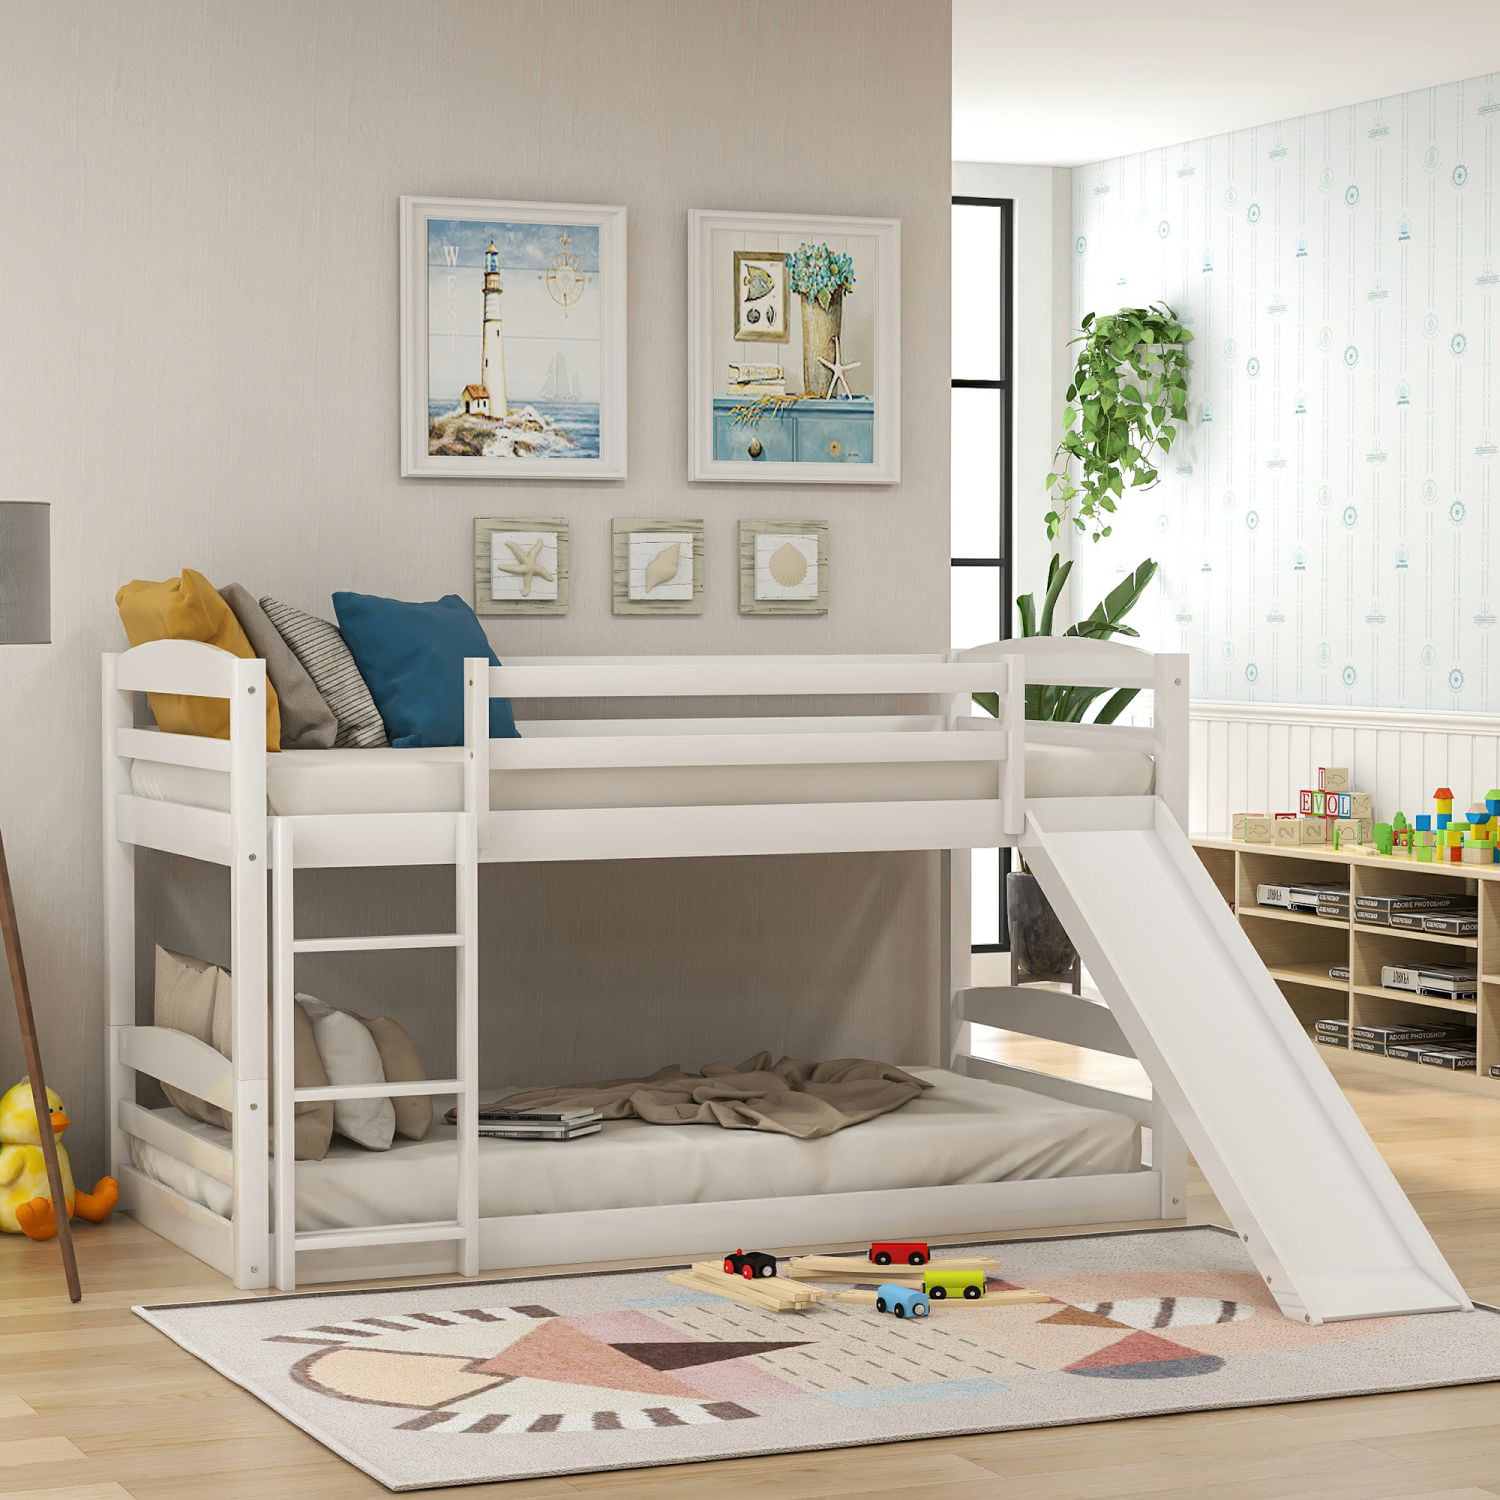 Modern Low Bunk Bed Solid Wood Twin, Bunk Bed Ideas For Boy And Girl